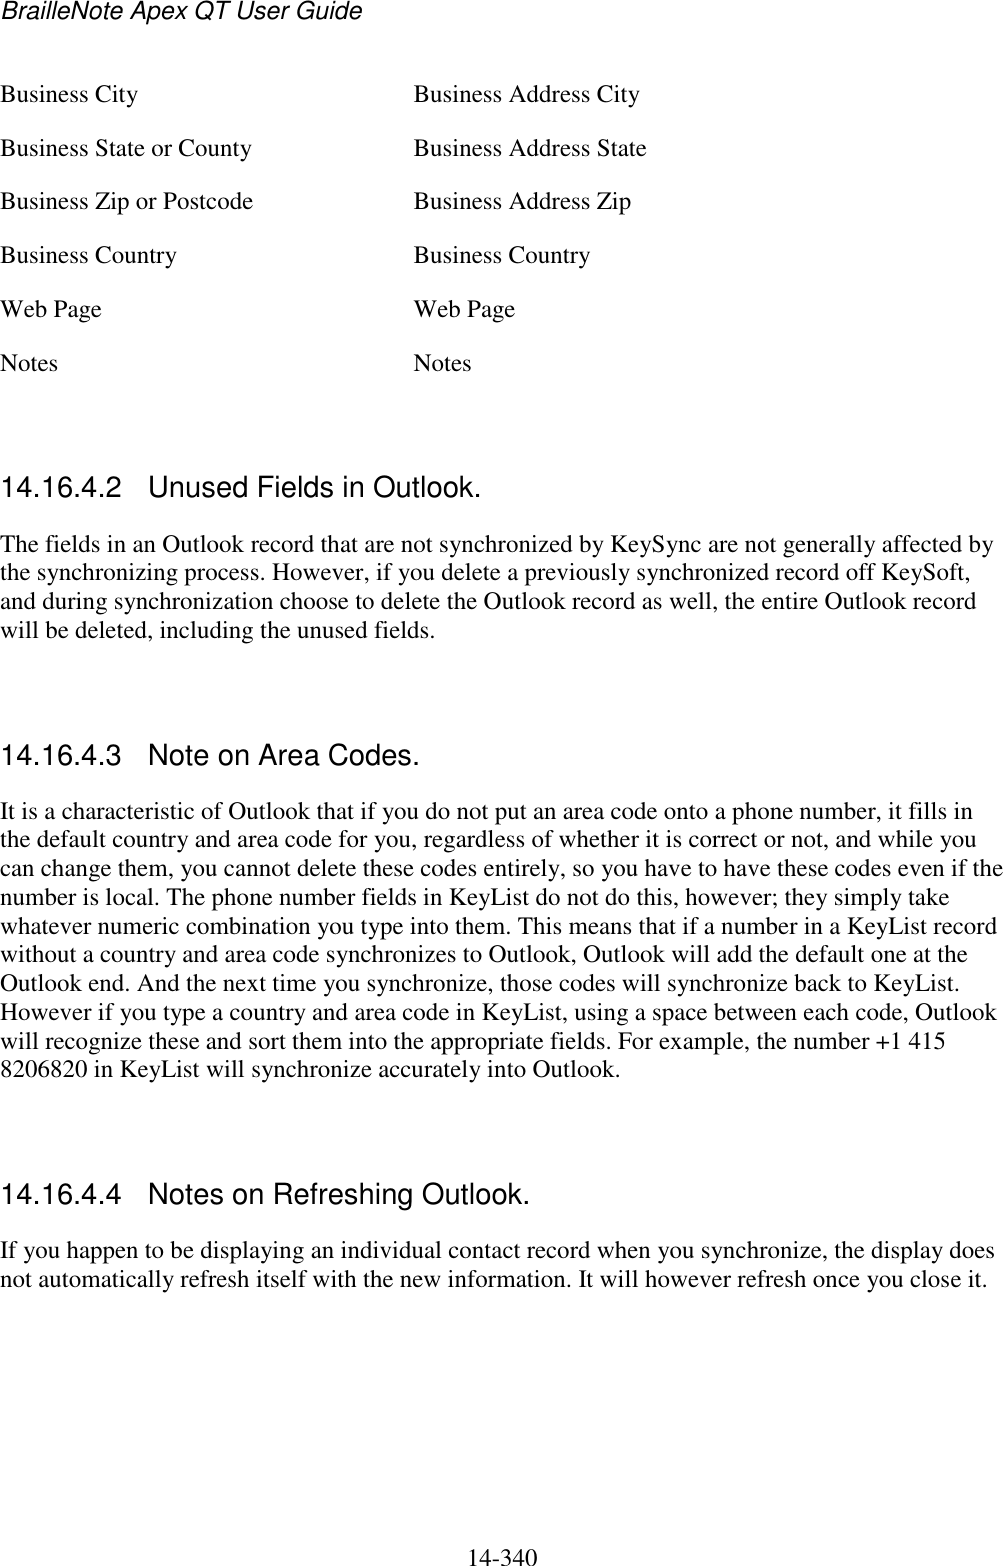 BrailleNote Apex QT User Guide  14-340   Business City  Business Address City Business State or County  Business Address State Business Zip or Postcode  Business Address Zip Business Country  Business Country Web Page  Web Page Notes  Notes   14.16.4.2  Unused Fields in Outlook. The fields in an Outlook record that are not synchronized by KeySync are not generally affected by the synchronizing process. However, if you delete a previously synchronized record off KeySoft, and during synchronization choose to delete the Outlook record as well, the entire Outlook record will be deleted, including the unused fields.   14.16.4.3  Note on Area Codes. It is a characteristic of Outlook that if you do not put an area code onto a phone number, it fills in the default country and area code for you, regardless of whether it is correct or not, and while you can change them, you cannot delete these codes entirely, so you have to have these codes even if the number is local. The phone number fields in KeyList do not do this, however; they simply take whatever numeric combination you type into them. This means that if a number in a KeyList record without a country and area code synchronizes to Outlook, Outlook will add the default one at the Outlook end. And the next time you synchronize, those codes will synchronize back to KeyList. However if you type a country and area code in KeyList, using a space between each code, Outlook will recognize these and sort them into the appropriate fields. For example, the number +1 415 8206820 in KeyList will synchronize accurately into Outlook.   14.16.4.4  Notes on Refreshing Outlook. If you happen to be displaying an individual contact record when you synchronize, the display does not automatically refresh itself with the new information. It will however refresh once you close it.   